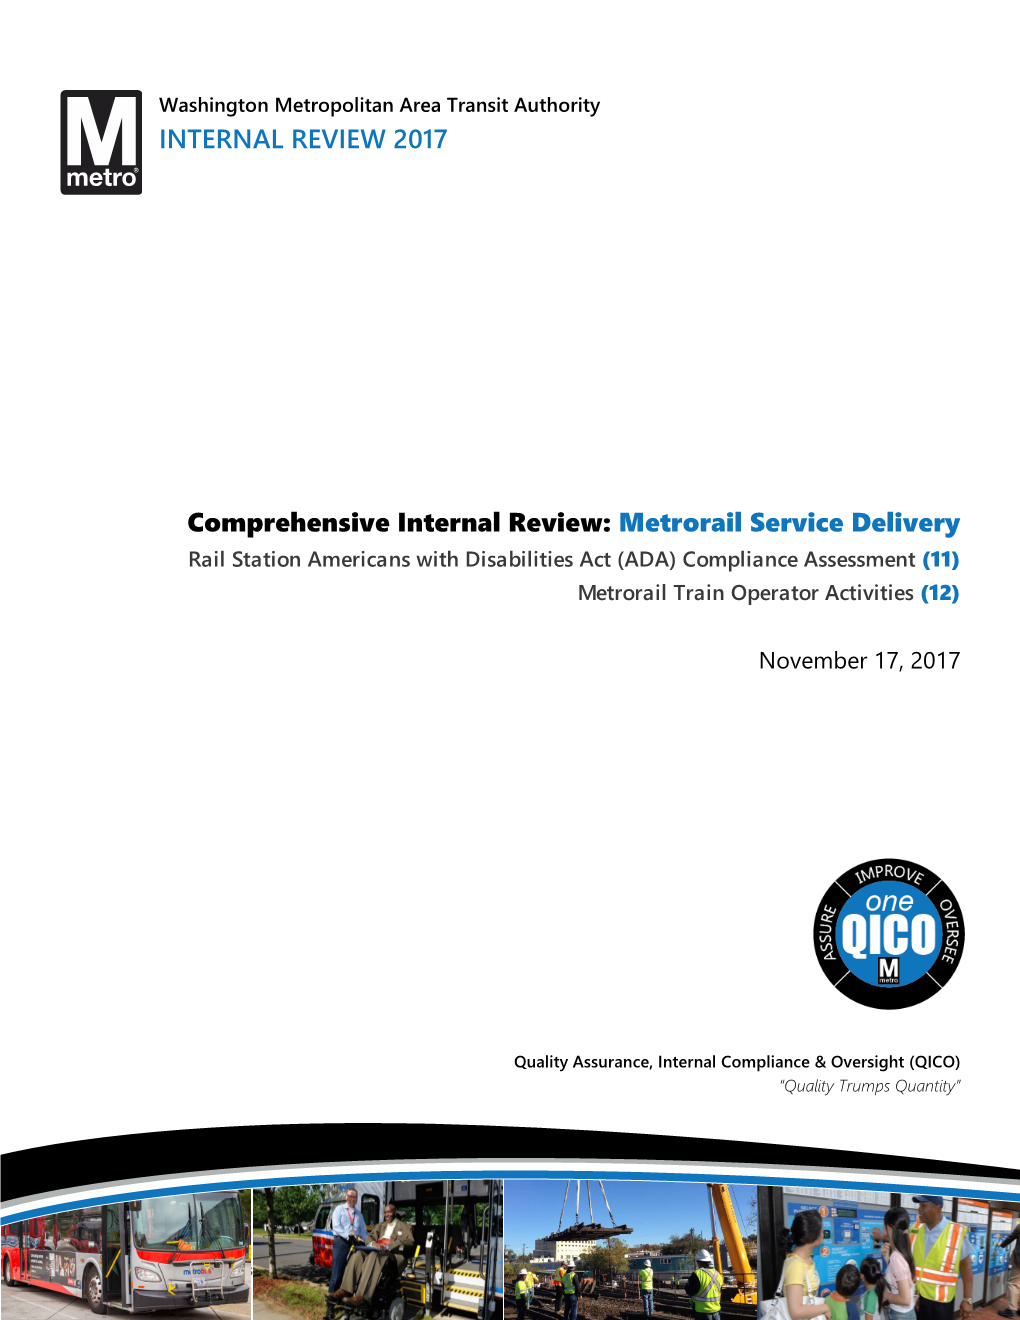 Metrorail Service Delivery Rail Station Americans with Disabilities Act (ADA) Compliance Assessment (11) Metrorail Train Operator Activities (12)